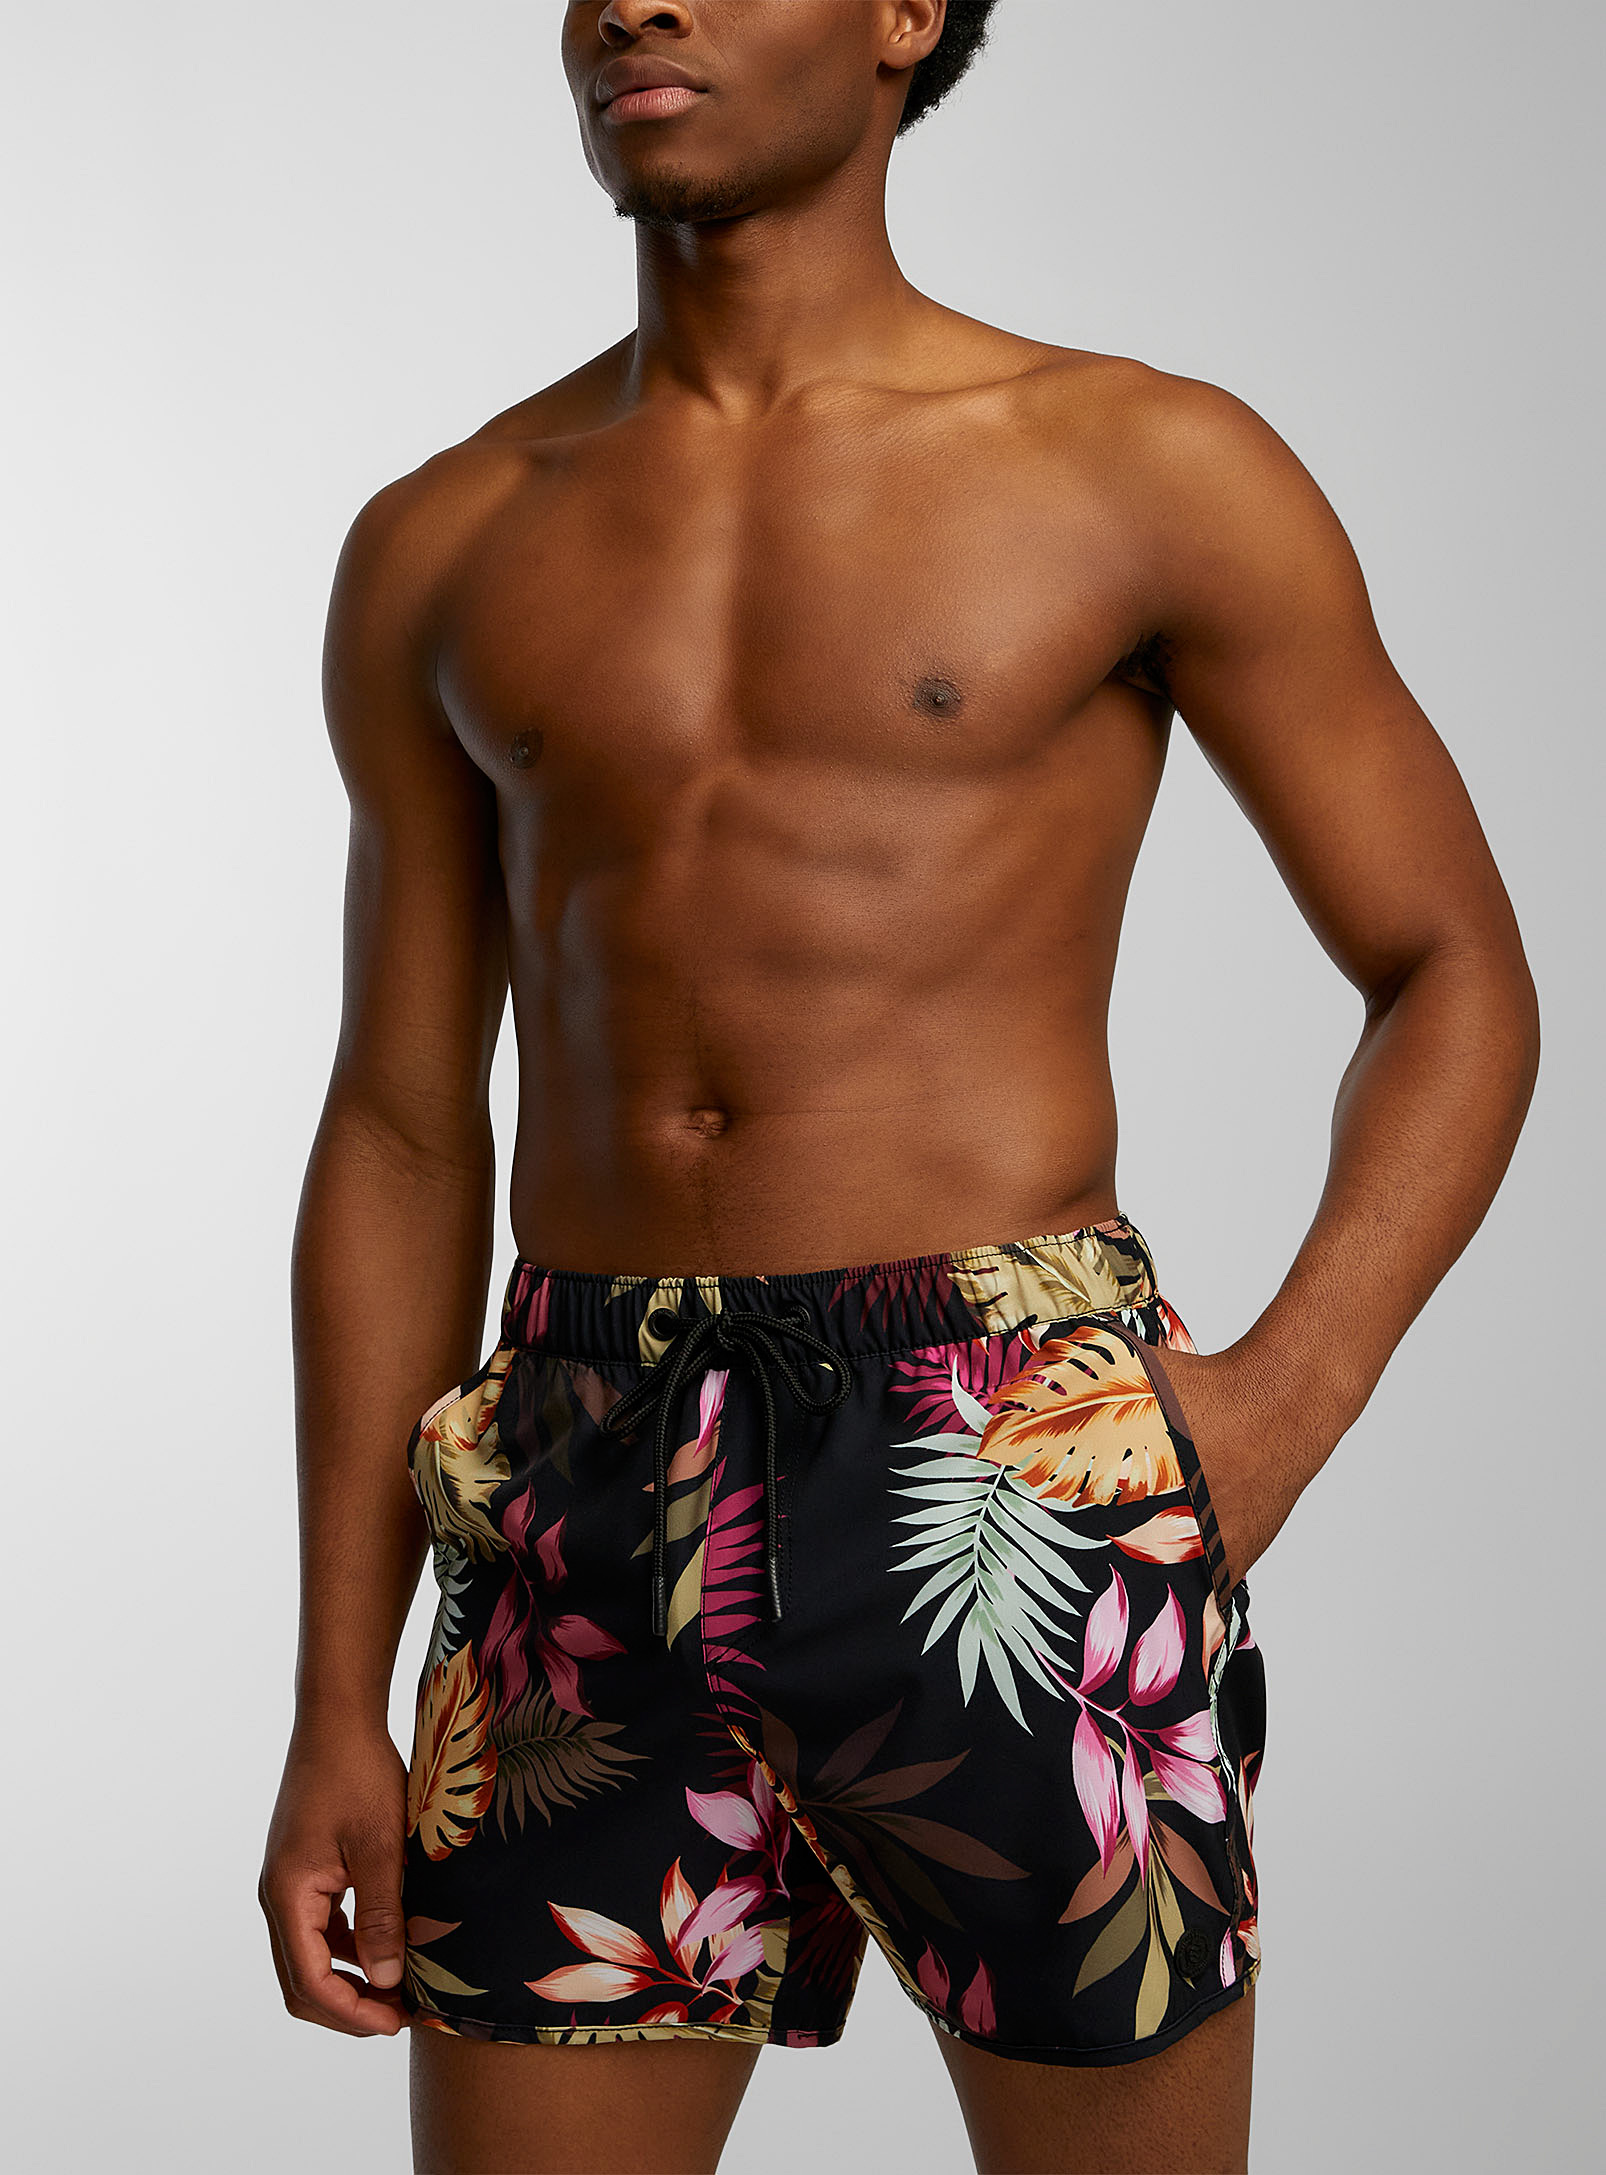 Everyday Sunday Tropical Foliage Swim Trunk In Patterned Black